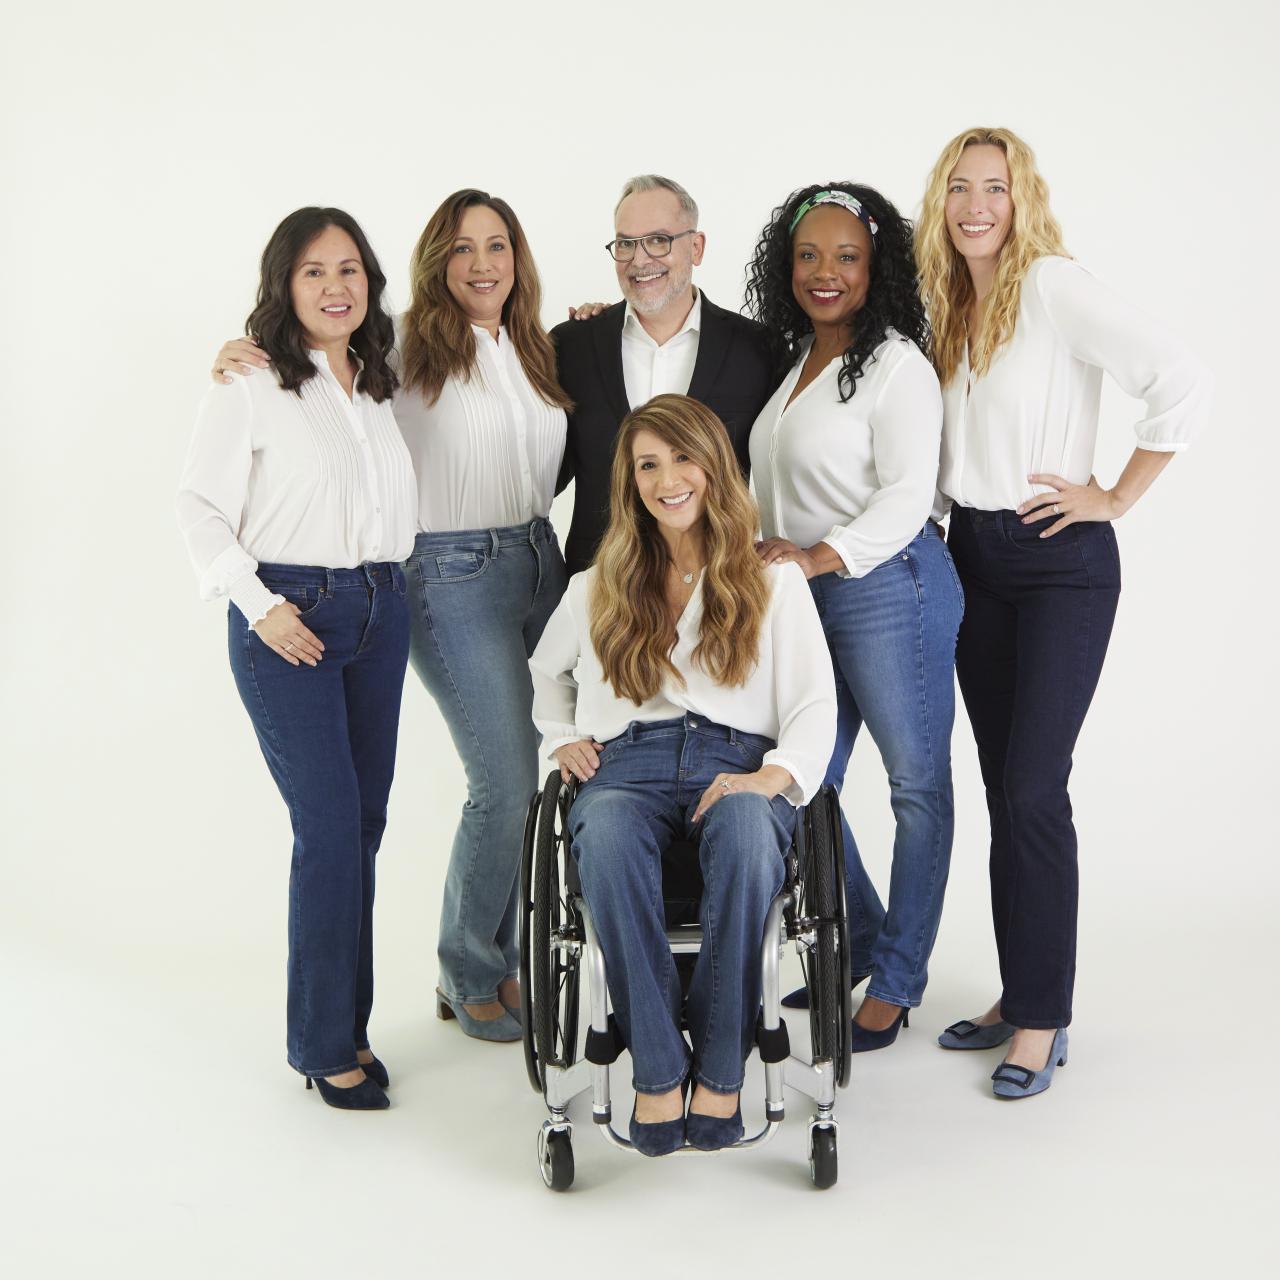 NYDJ Launches First Wheelchair-Fit Denim Jean With QVC